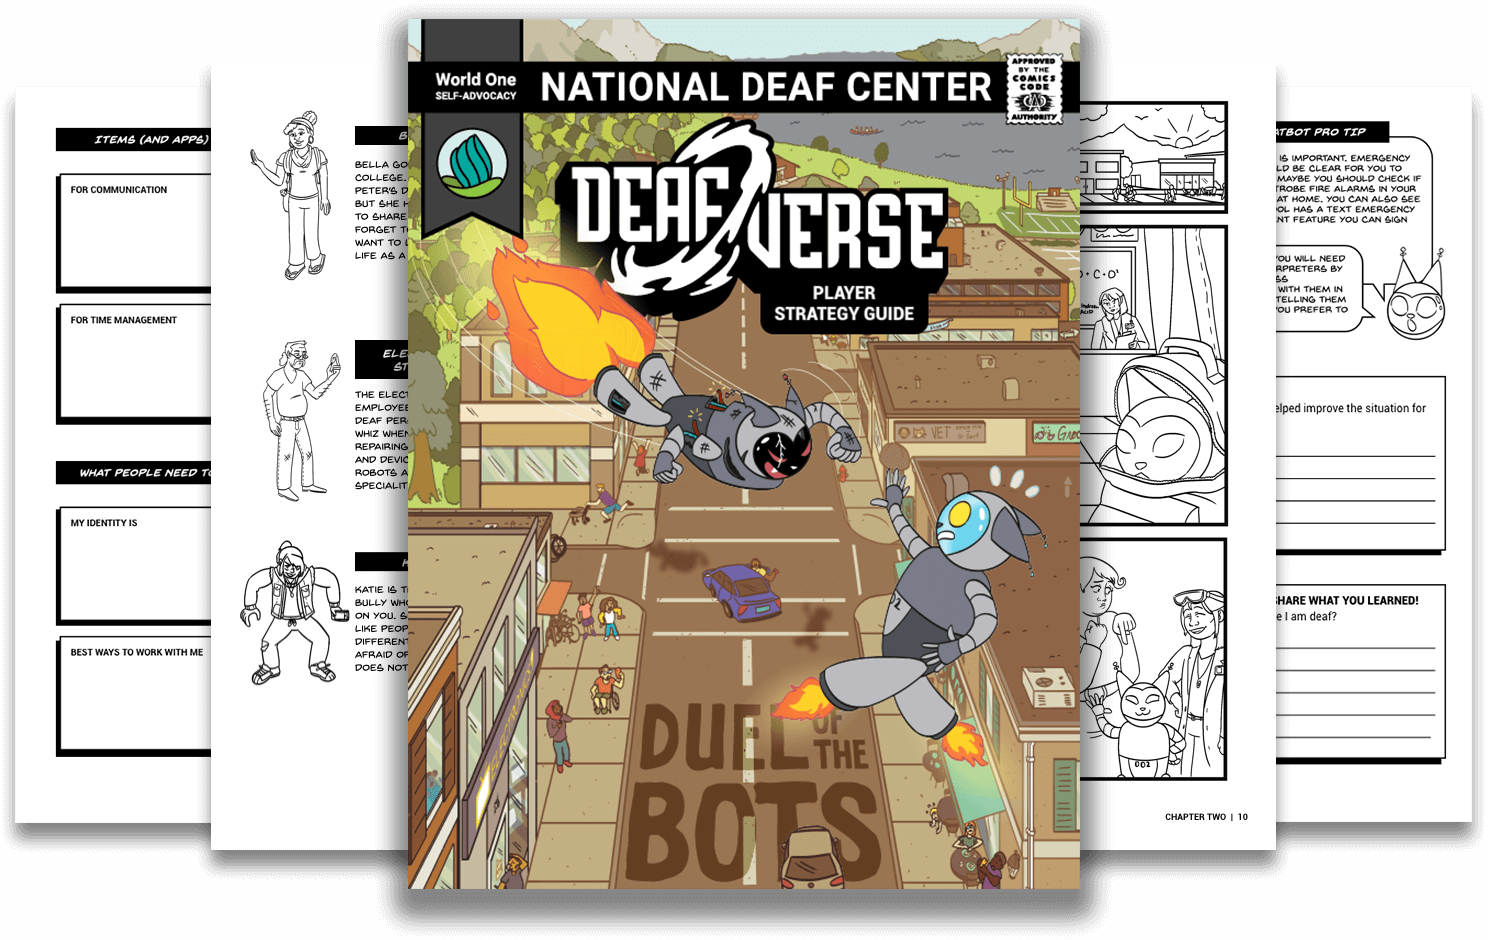 This image shows the pages along with the front cover of a Deafverse strategy guide.